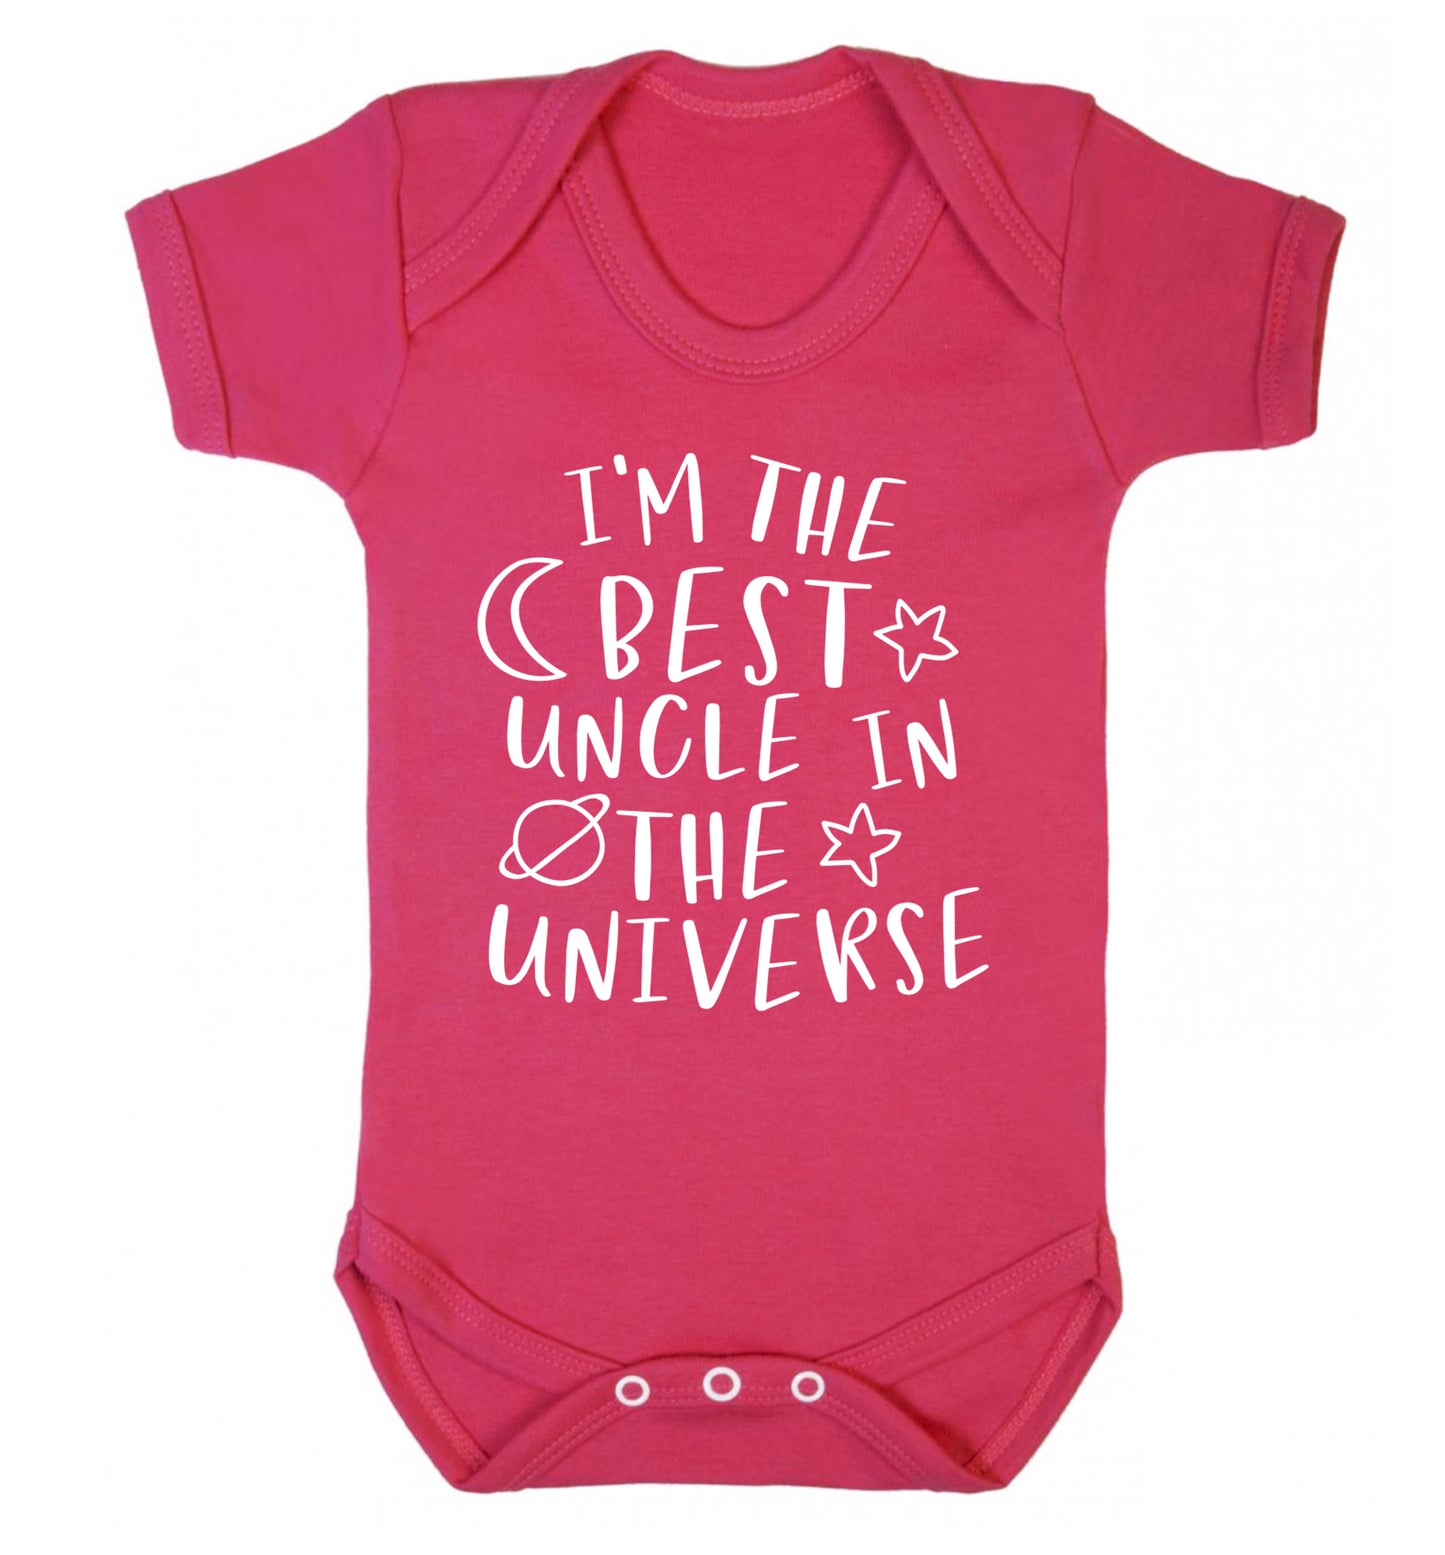 I'm the best uncle in the universe Baby Vest dark pink 18-24 months